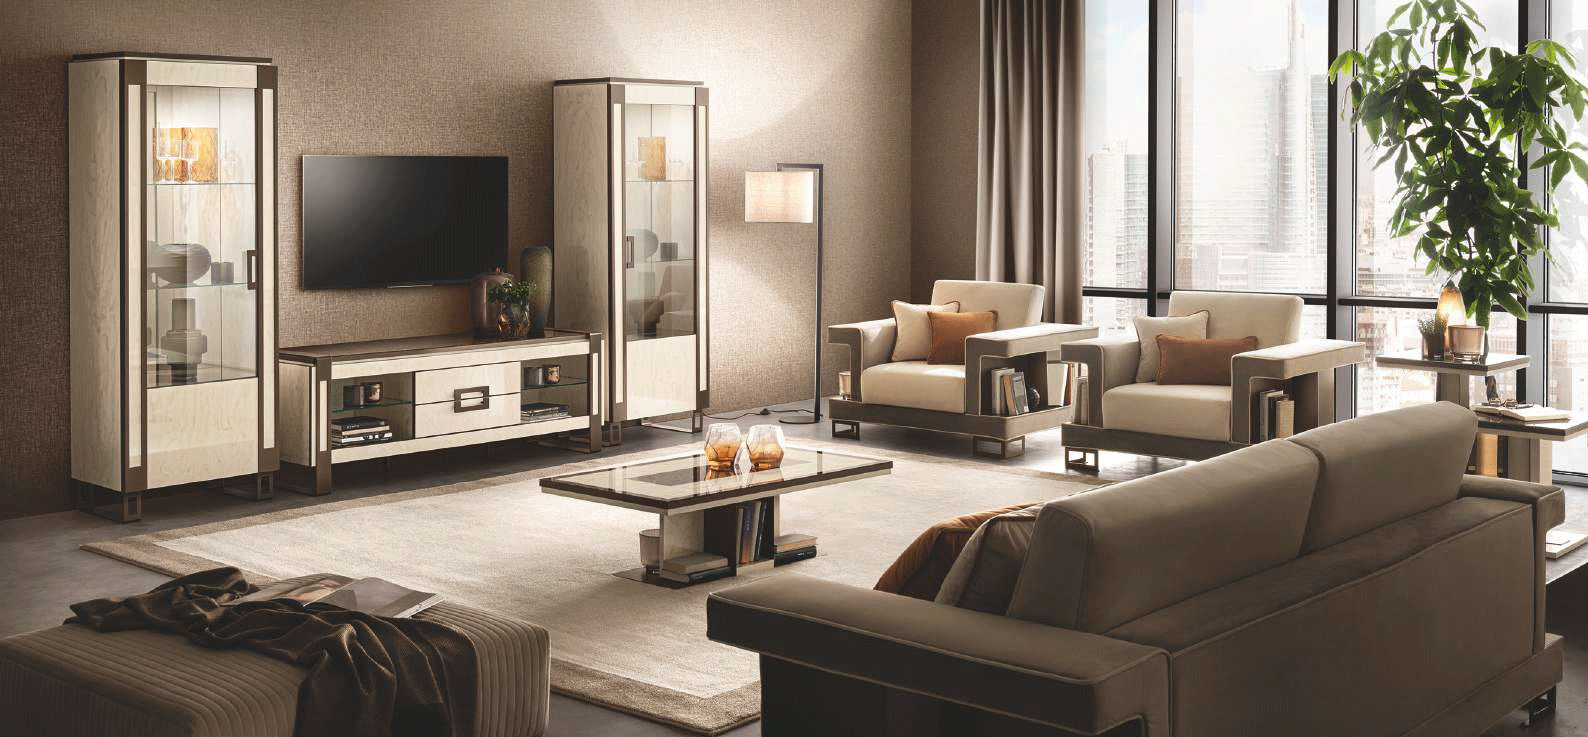 Wallunits Hallway Console tables and Mirrors Poesia Entertainment Center Additional items